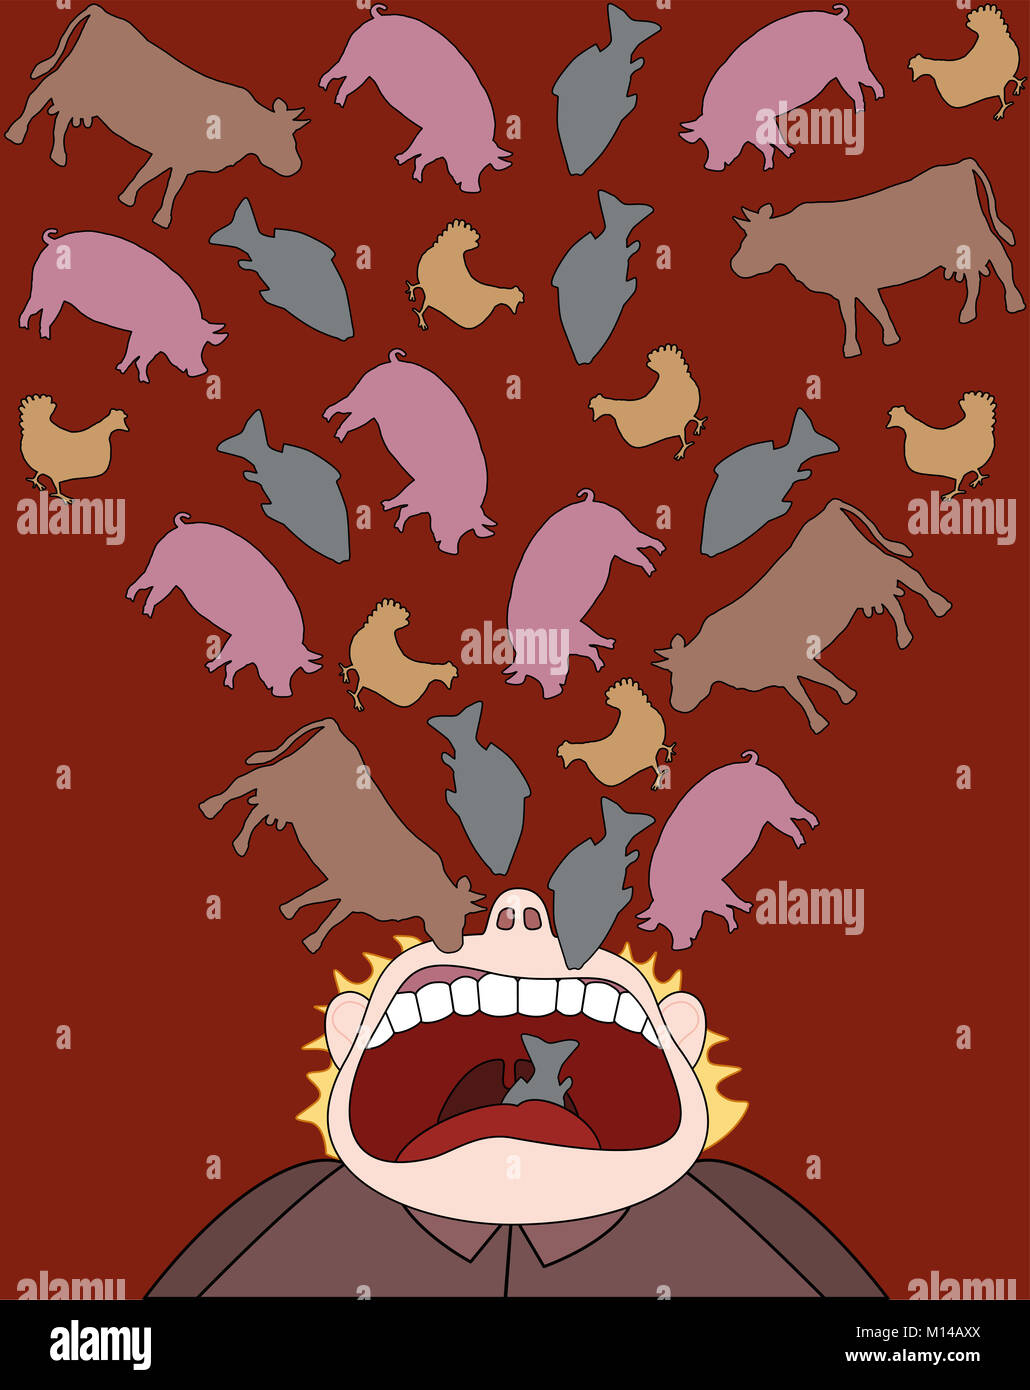 Eating meat - beef, pork, chicken and fish consumption - symbolic comic illustration of a man who eats animals instead of healthy vegetables, fruits. Stock Photo